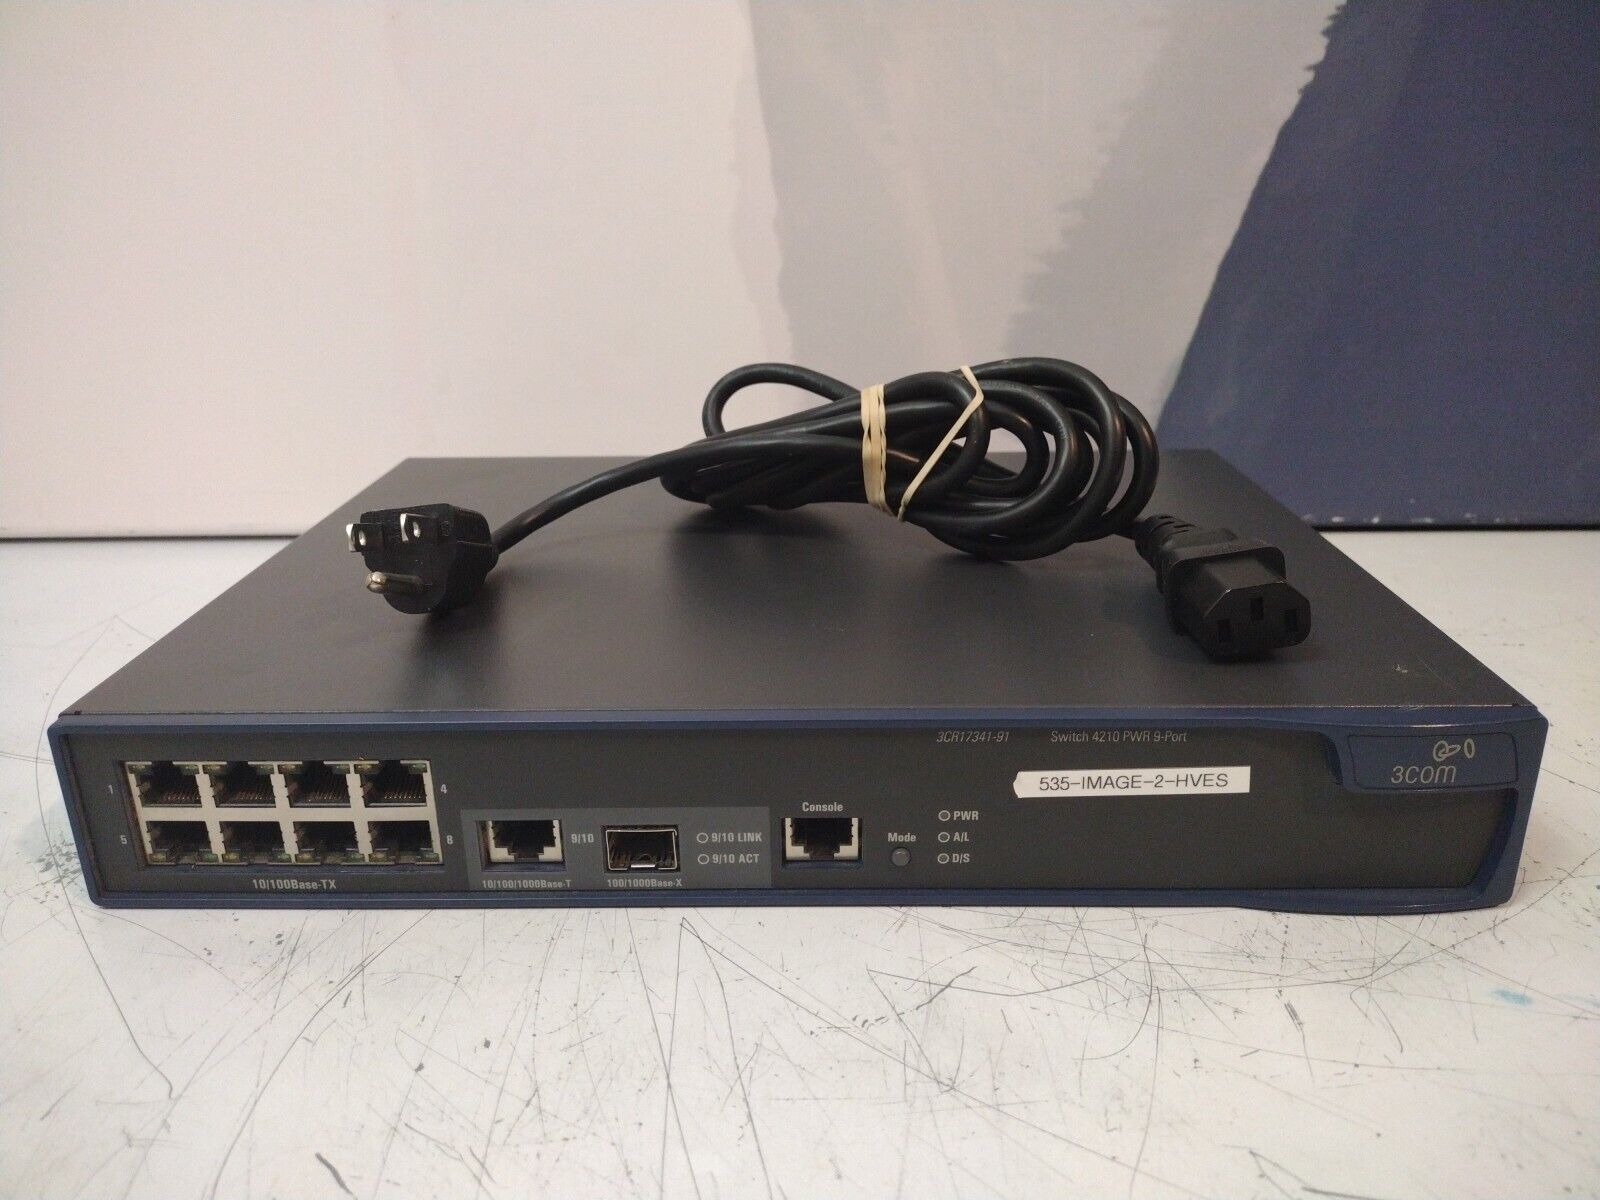 3com 3CR17341-91 Switch 4210 9-Port Switch wth Power Cord only in Good Condition